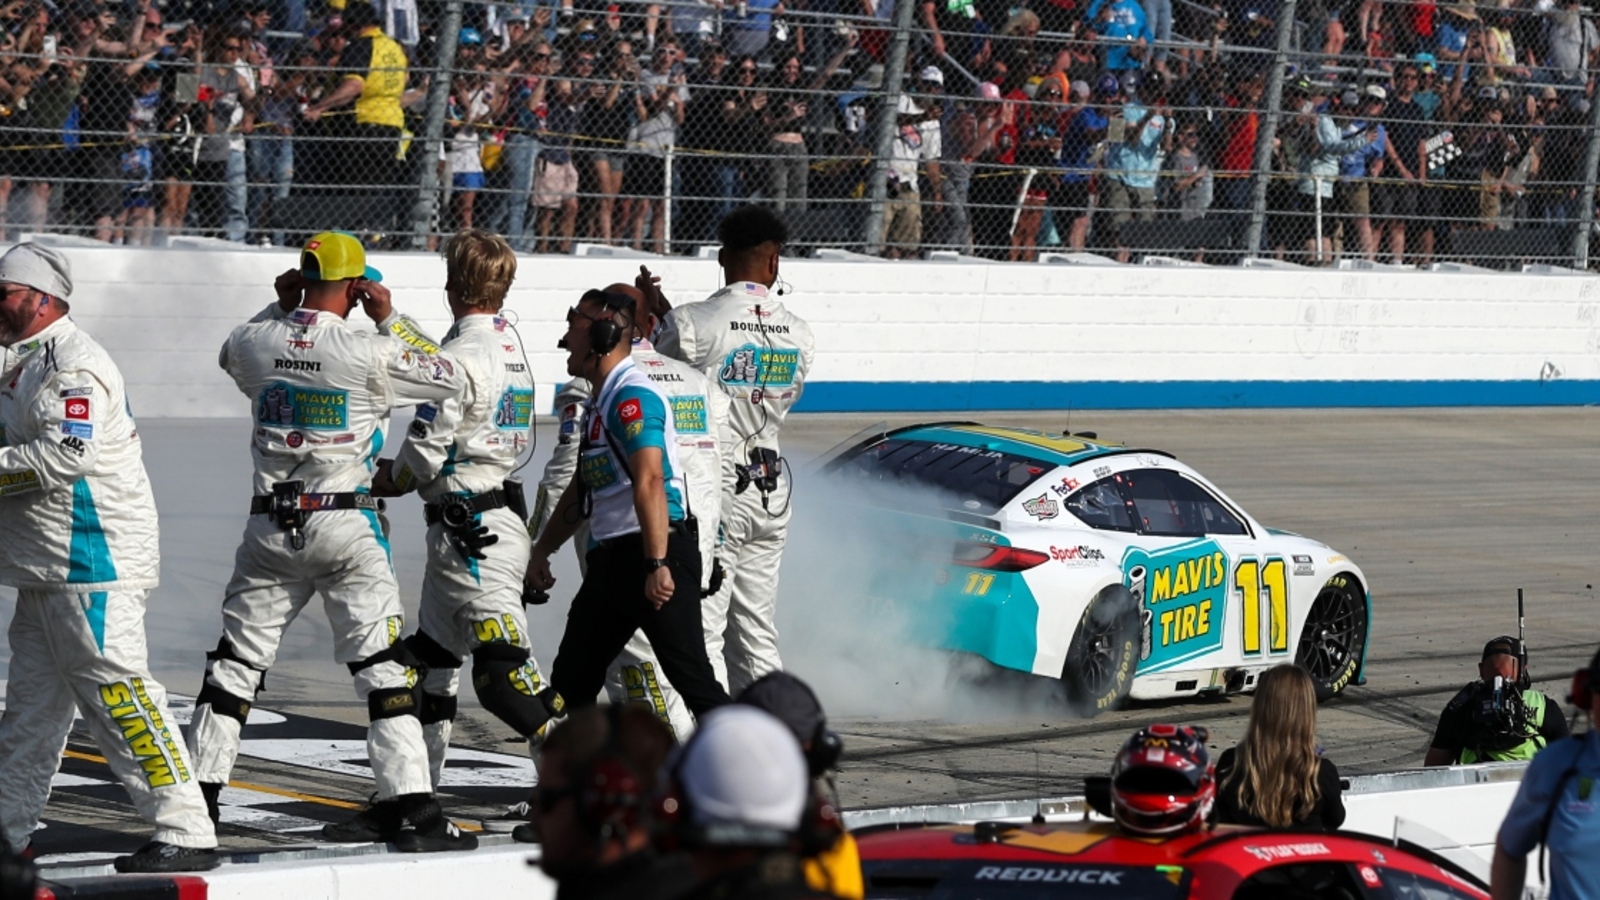 Kevin Harvick weighs in on pit road incident with Denny Hamlin, Kyle Larson, Alex Bowman